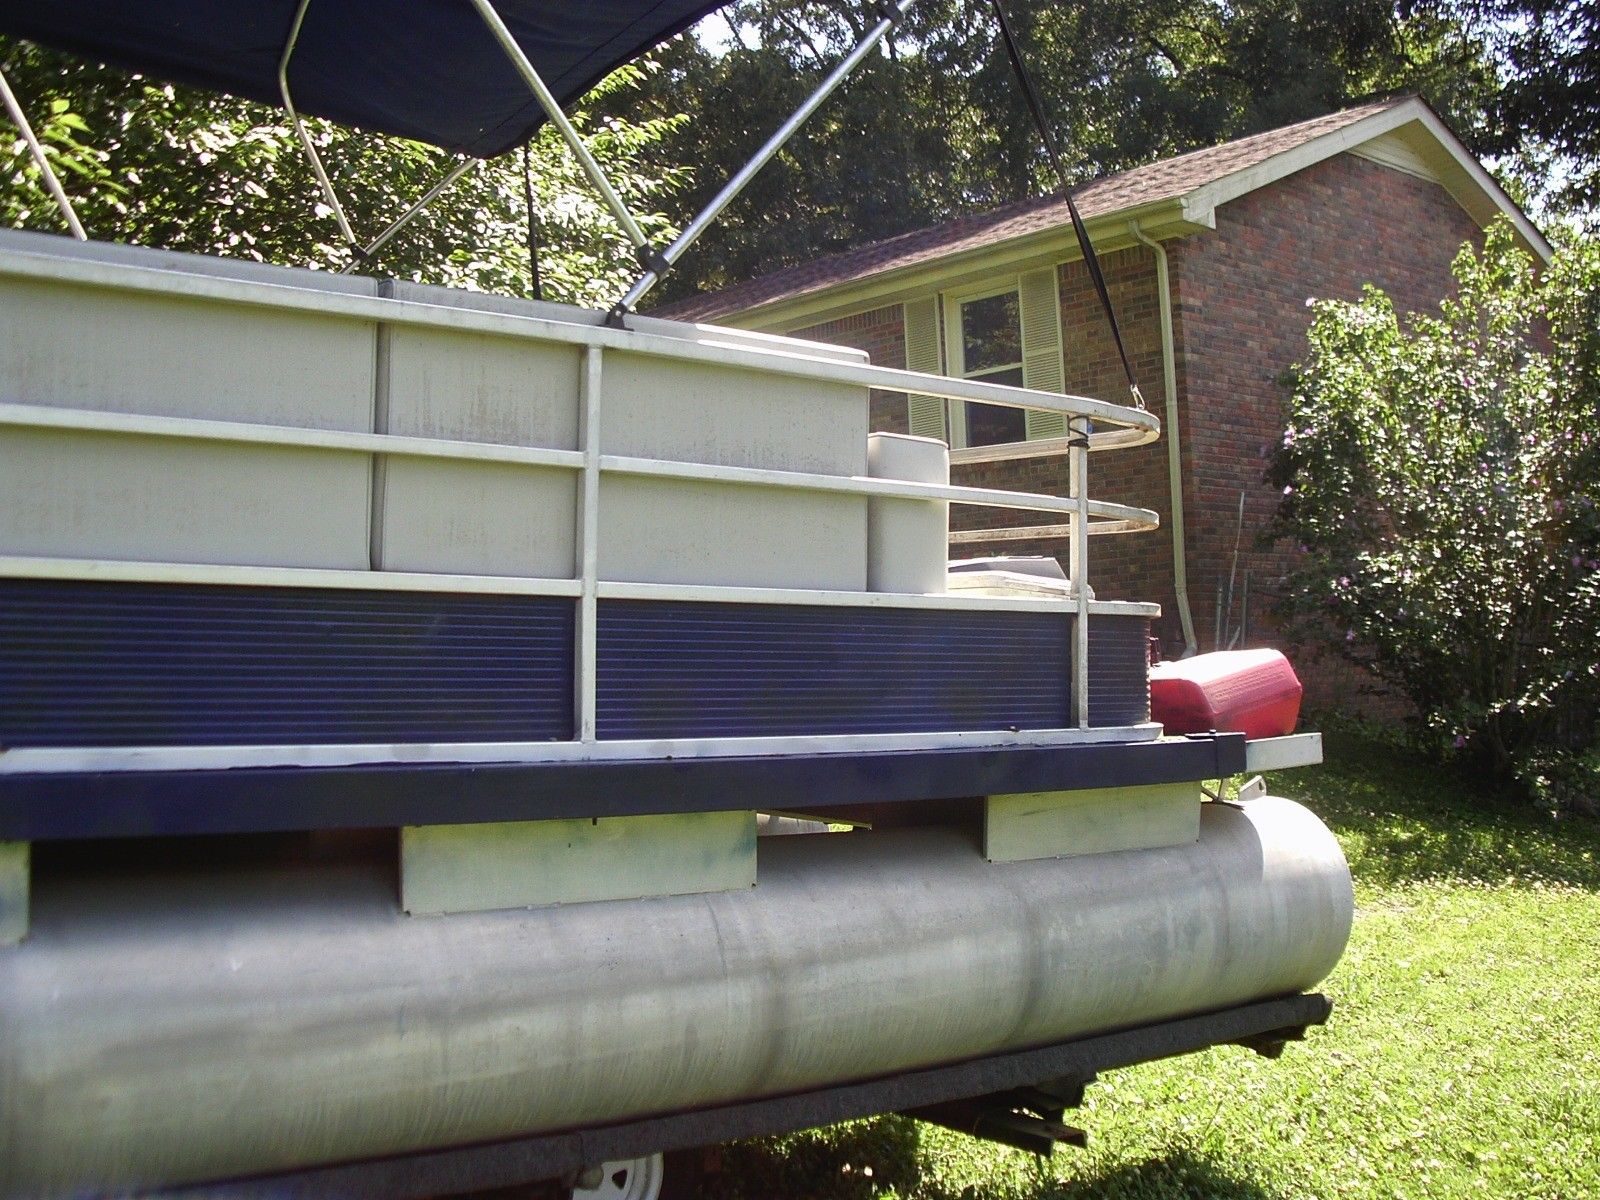 harris float boat 1970 for sale for $3,200 - boats-from